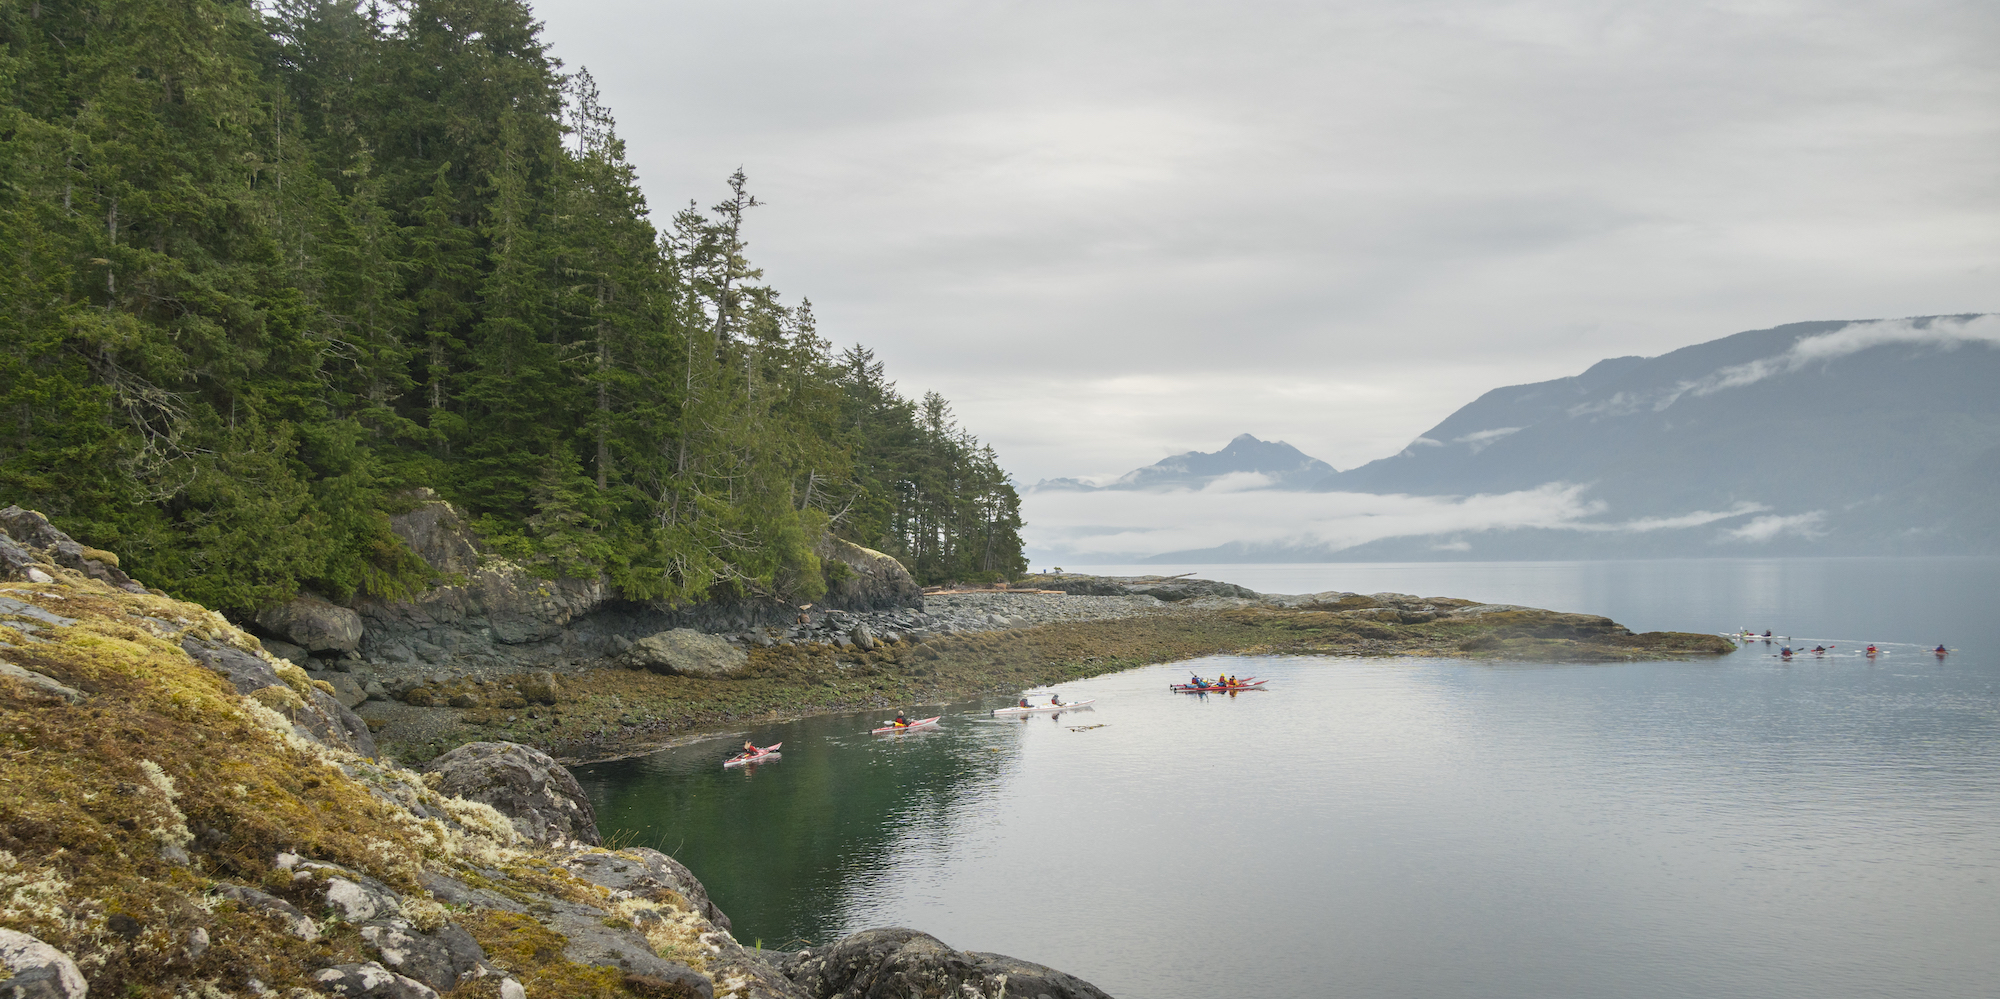 Sea kayakers paddling through a marine protected area in British Columbia on a foggy morning